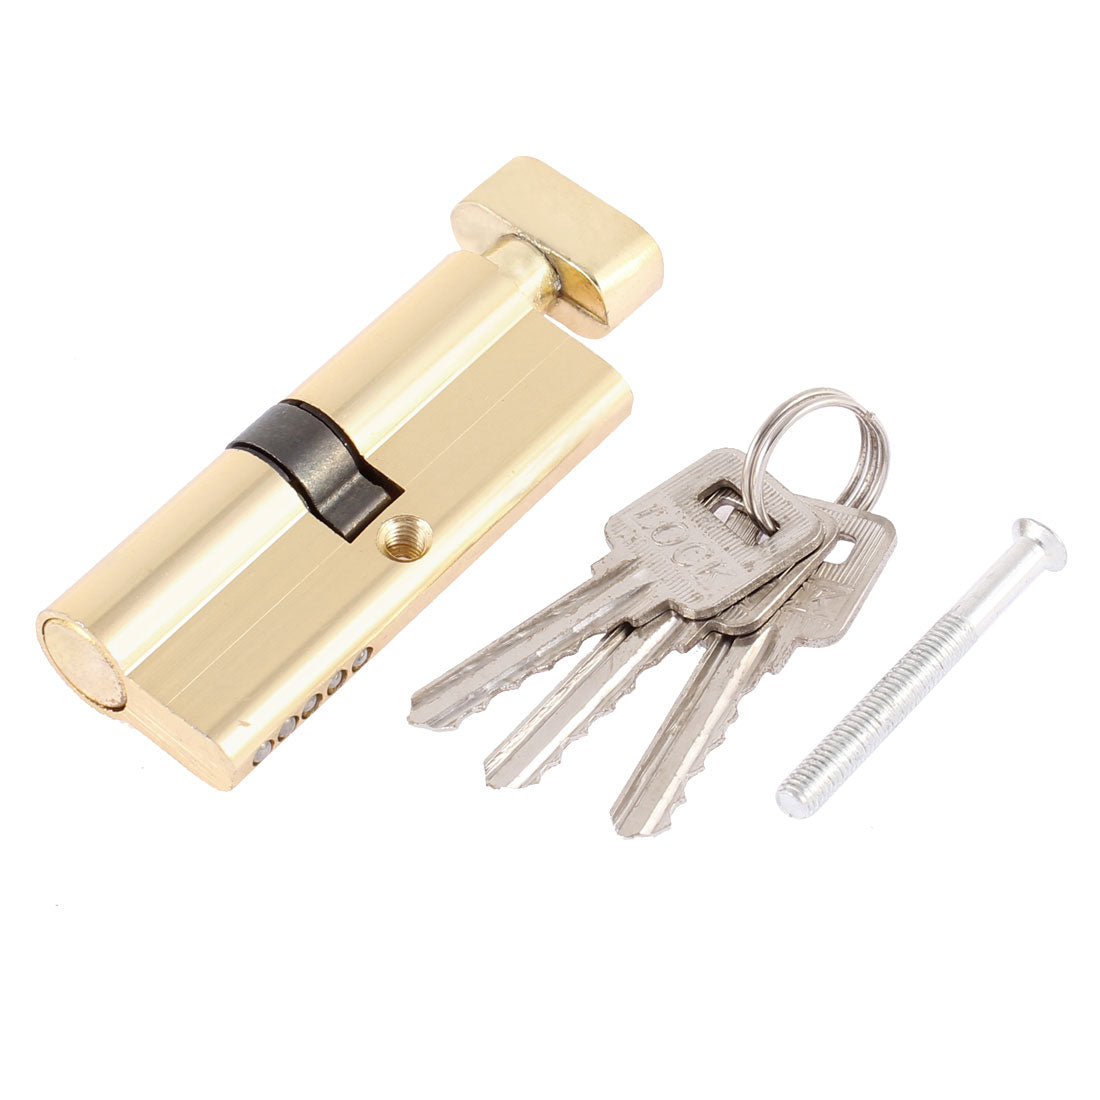 uxcell Uxcell 85mm Long Anti-theft Security Metal Door Lock Cylinder Gold Tone w Keys